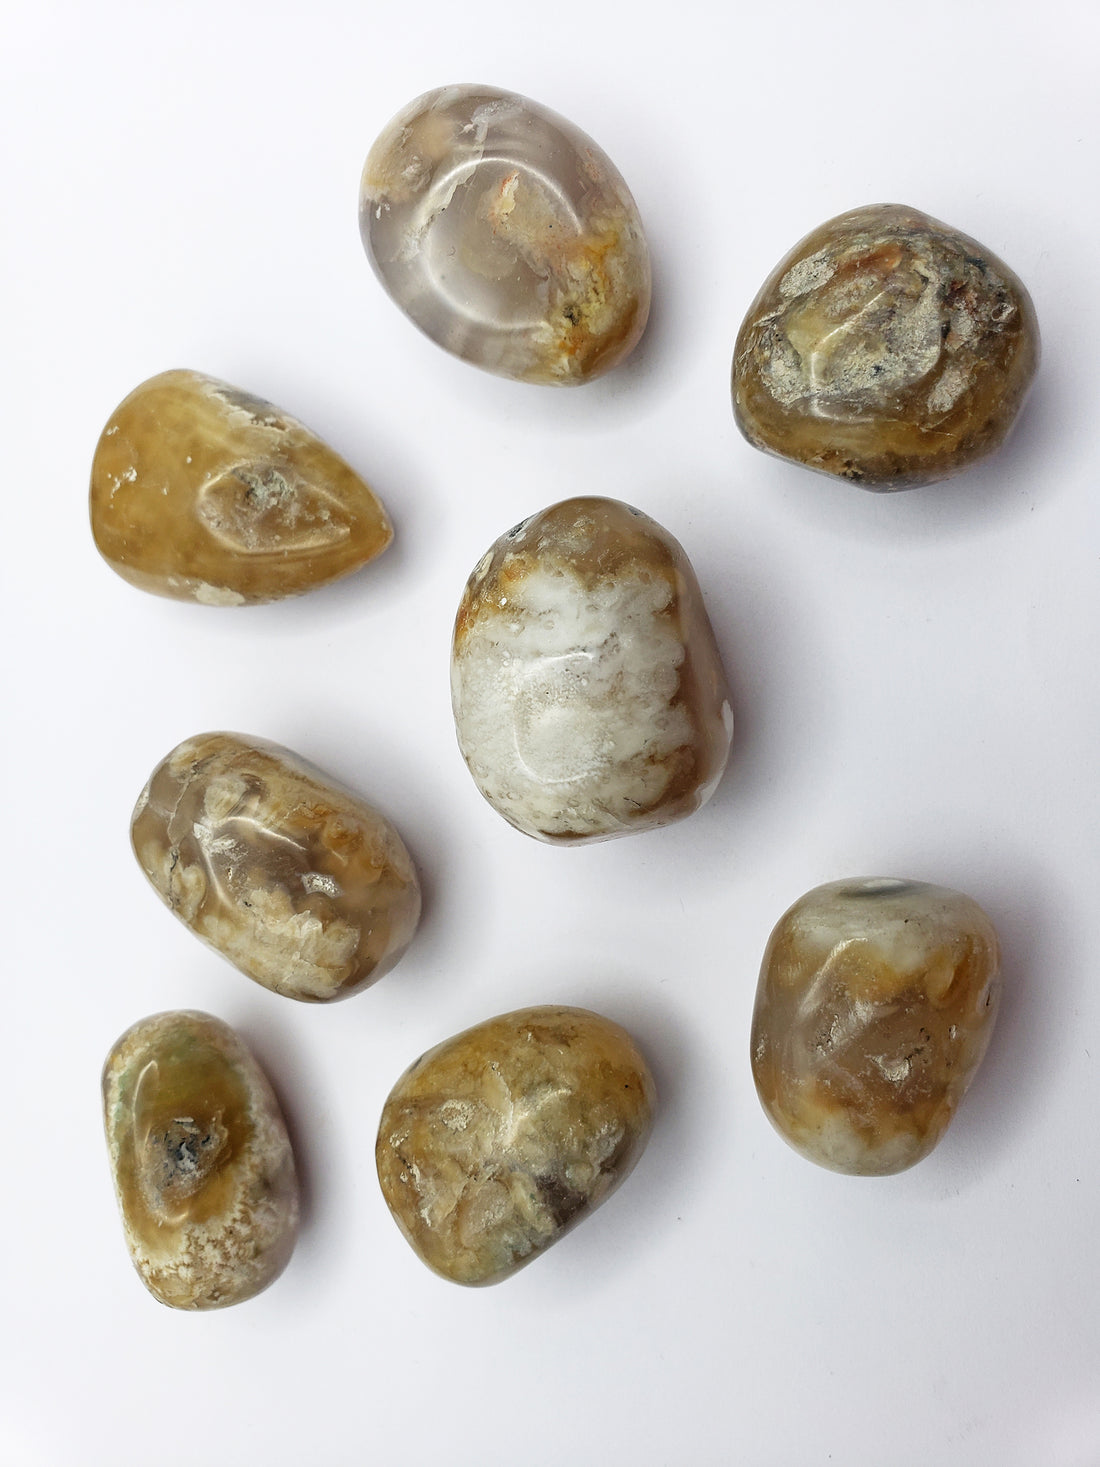 moss agate with petrified wood crystals on white background